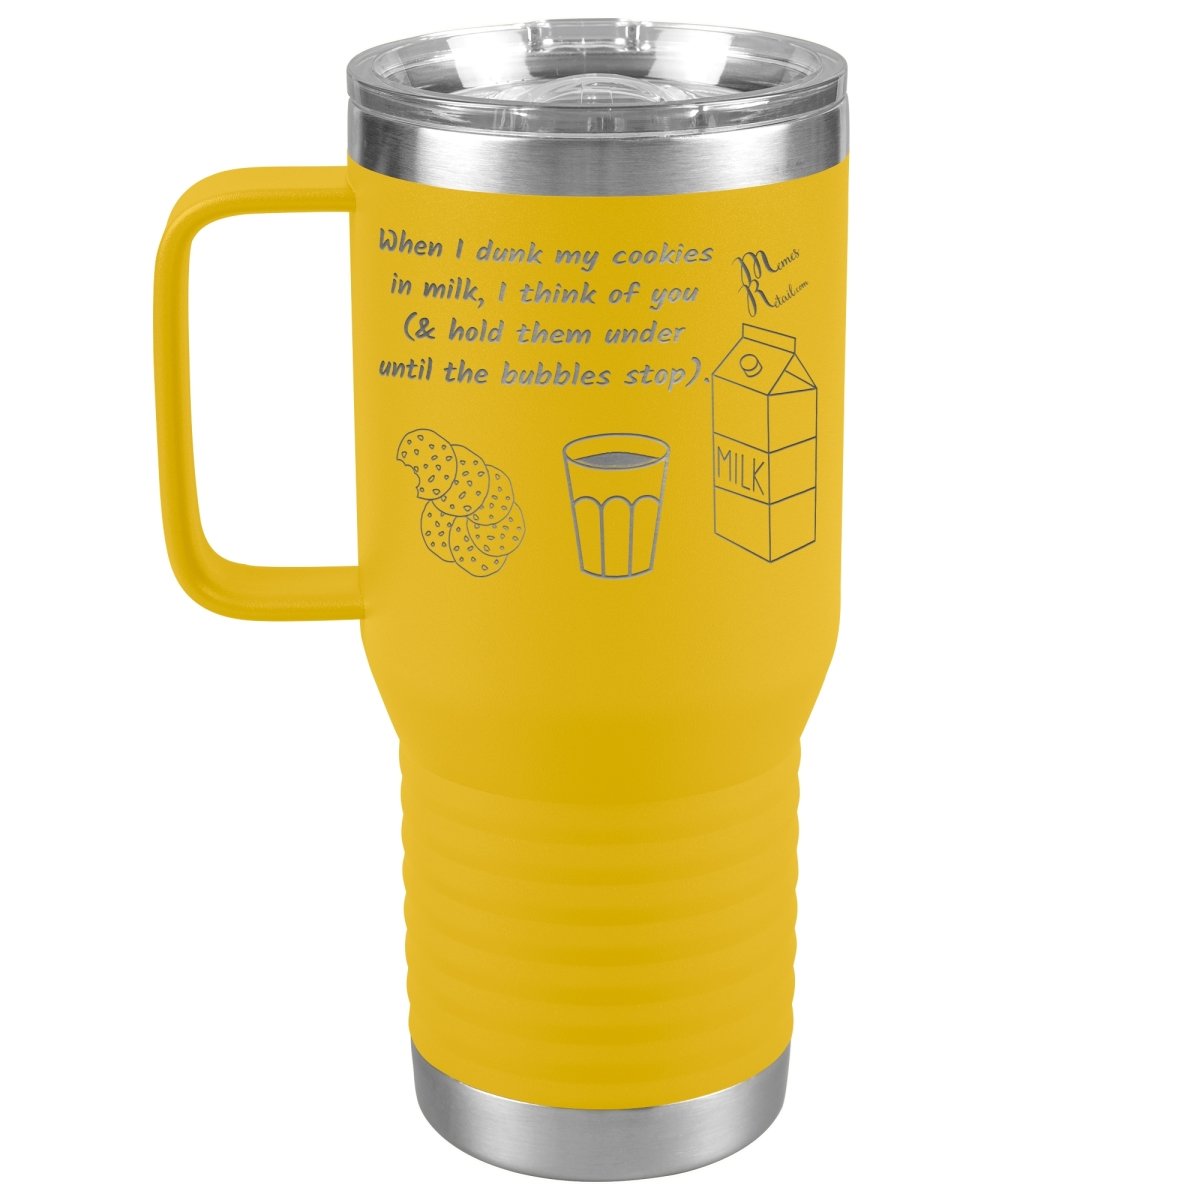 When I dunk My Cookies in Milk, I think of You - Tumblers, 20oz Travel Tumbler / Yellow - MemesRetail.com